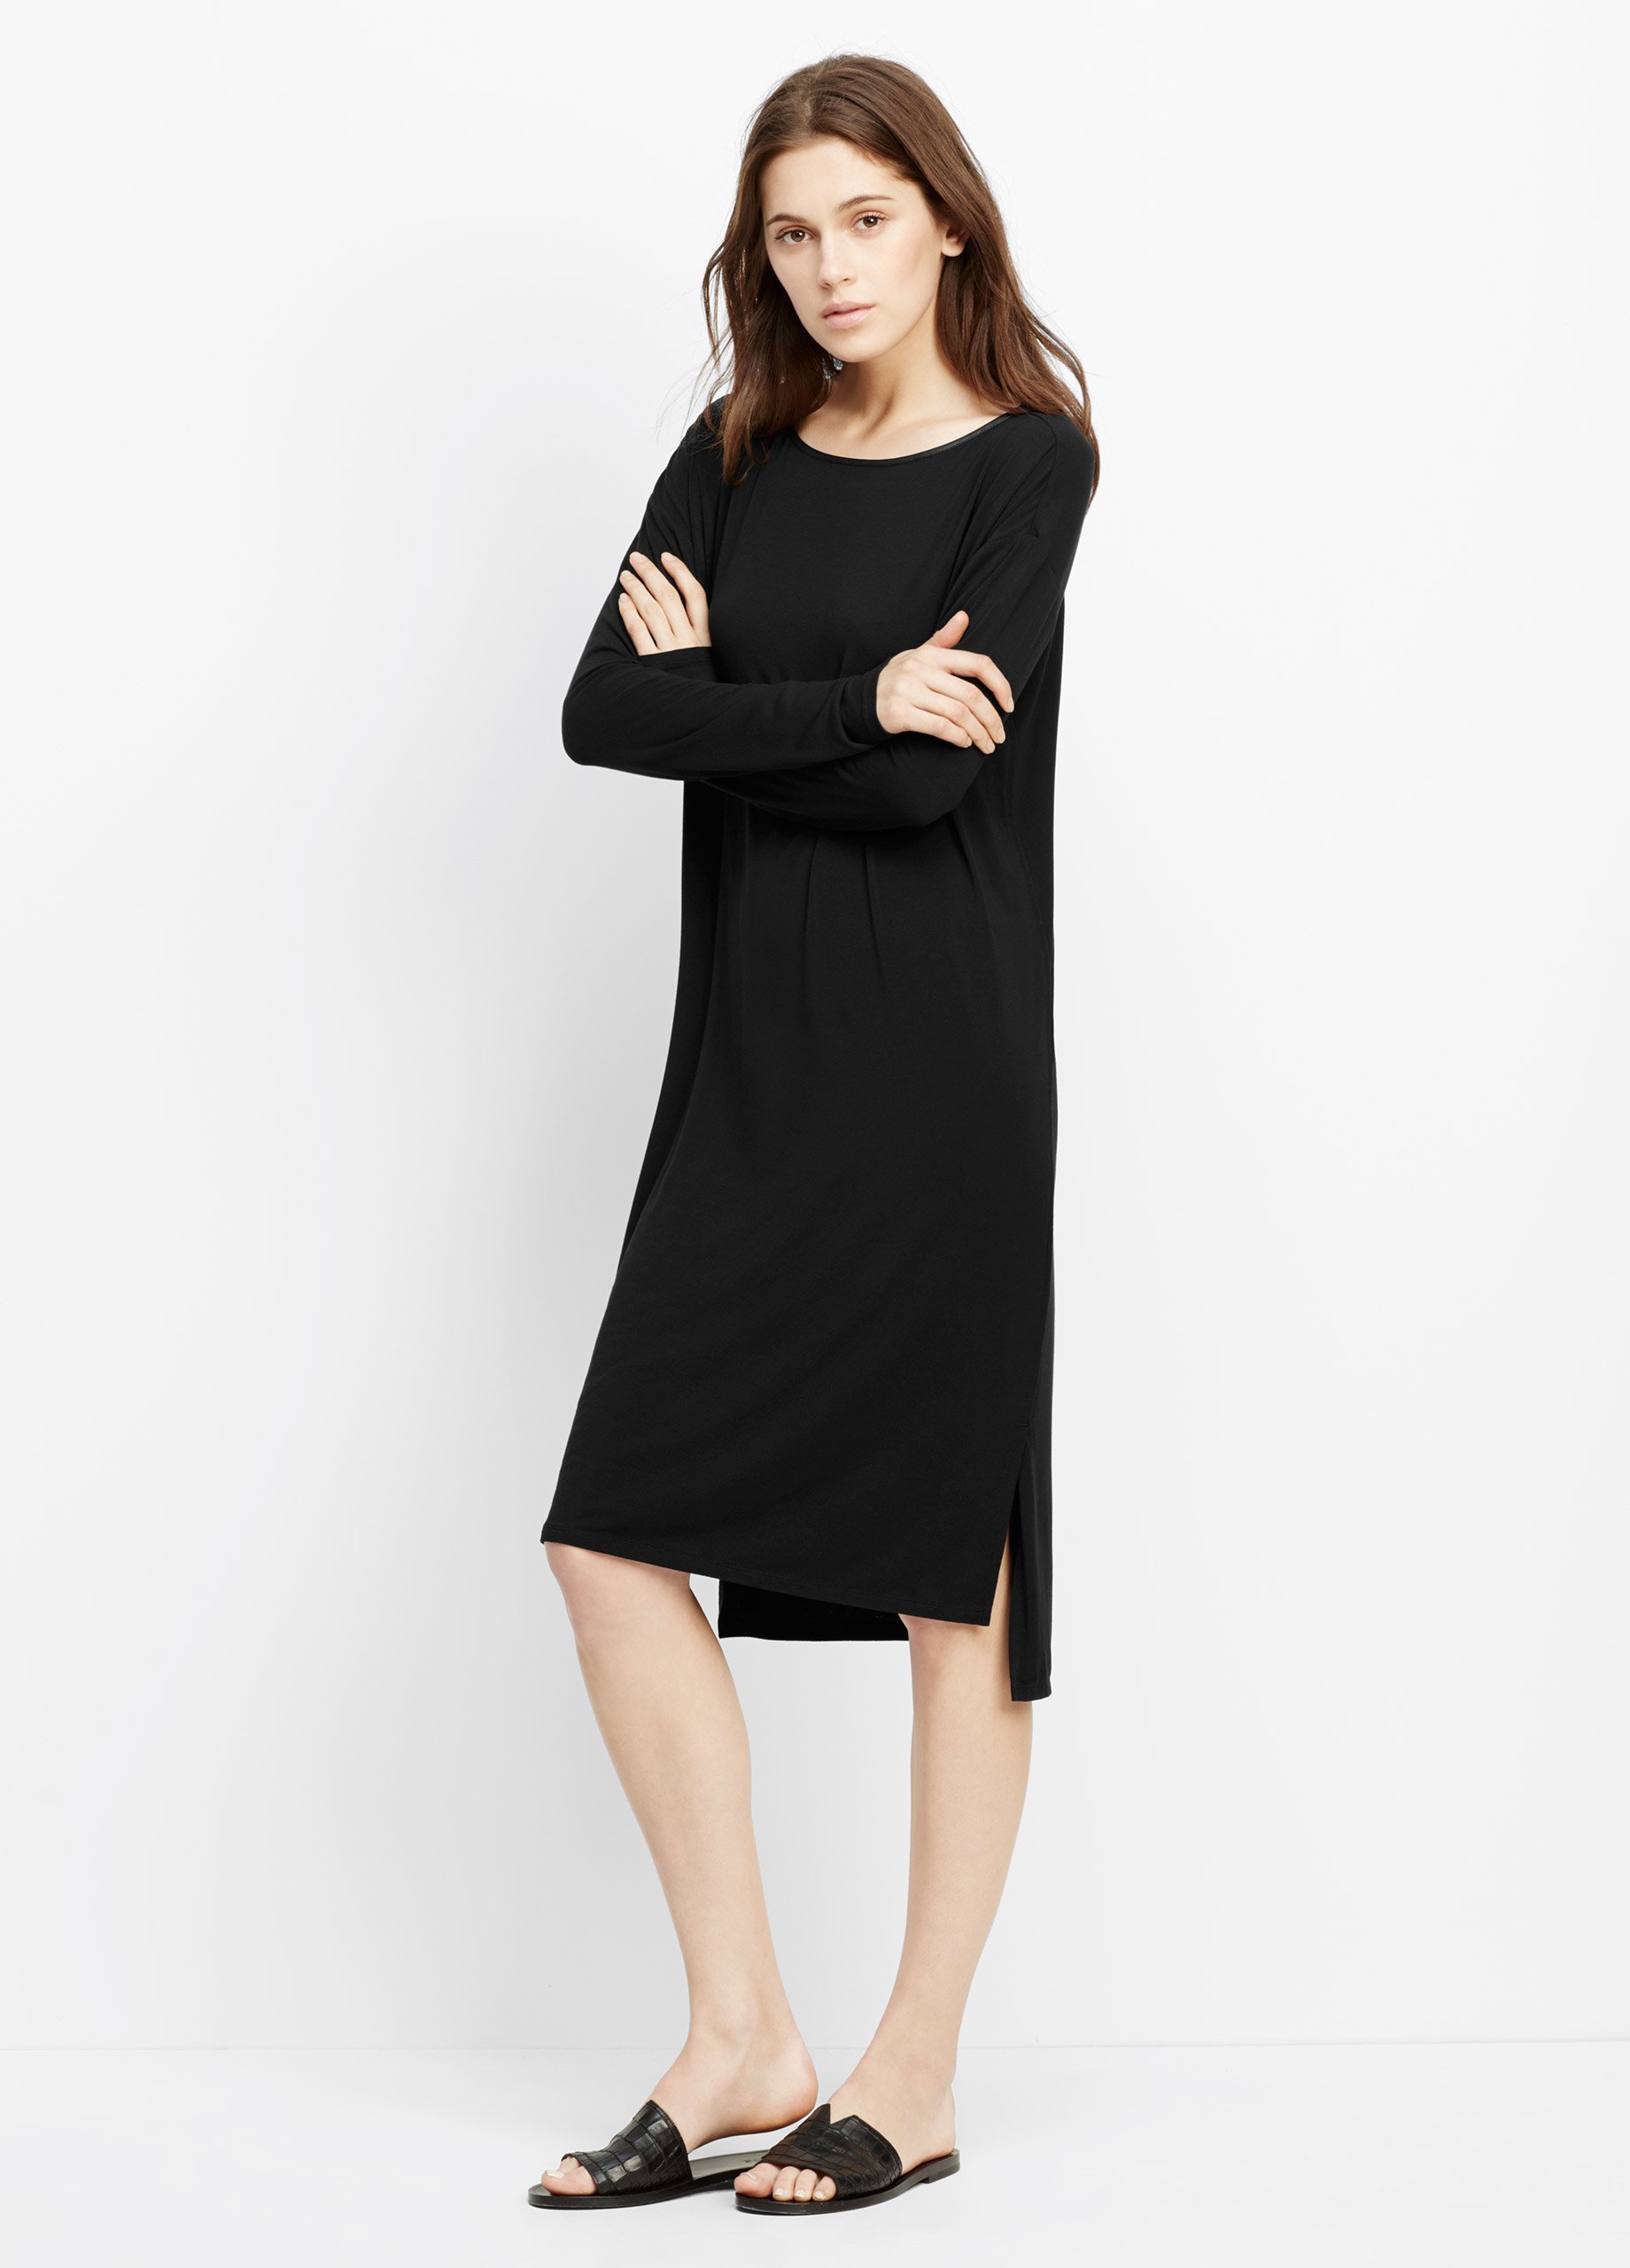 Black shirt dress long sleeve catalog white, Casual midi dresses with sleeves, dresses to wear to a fall wedding. 